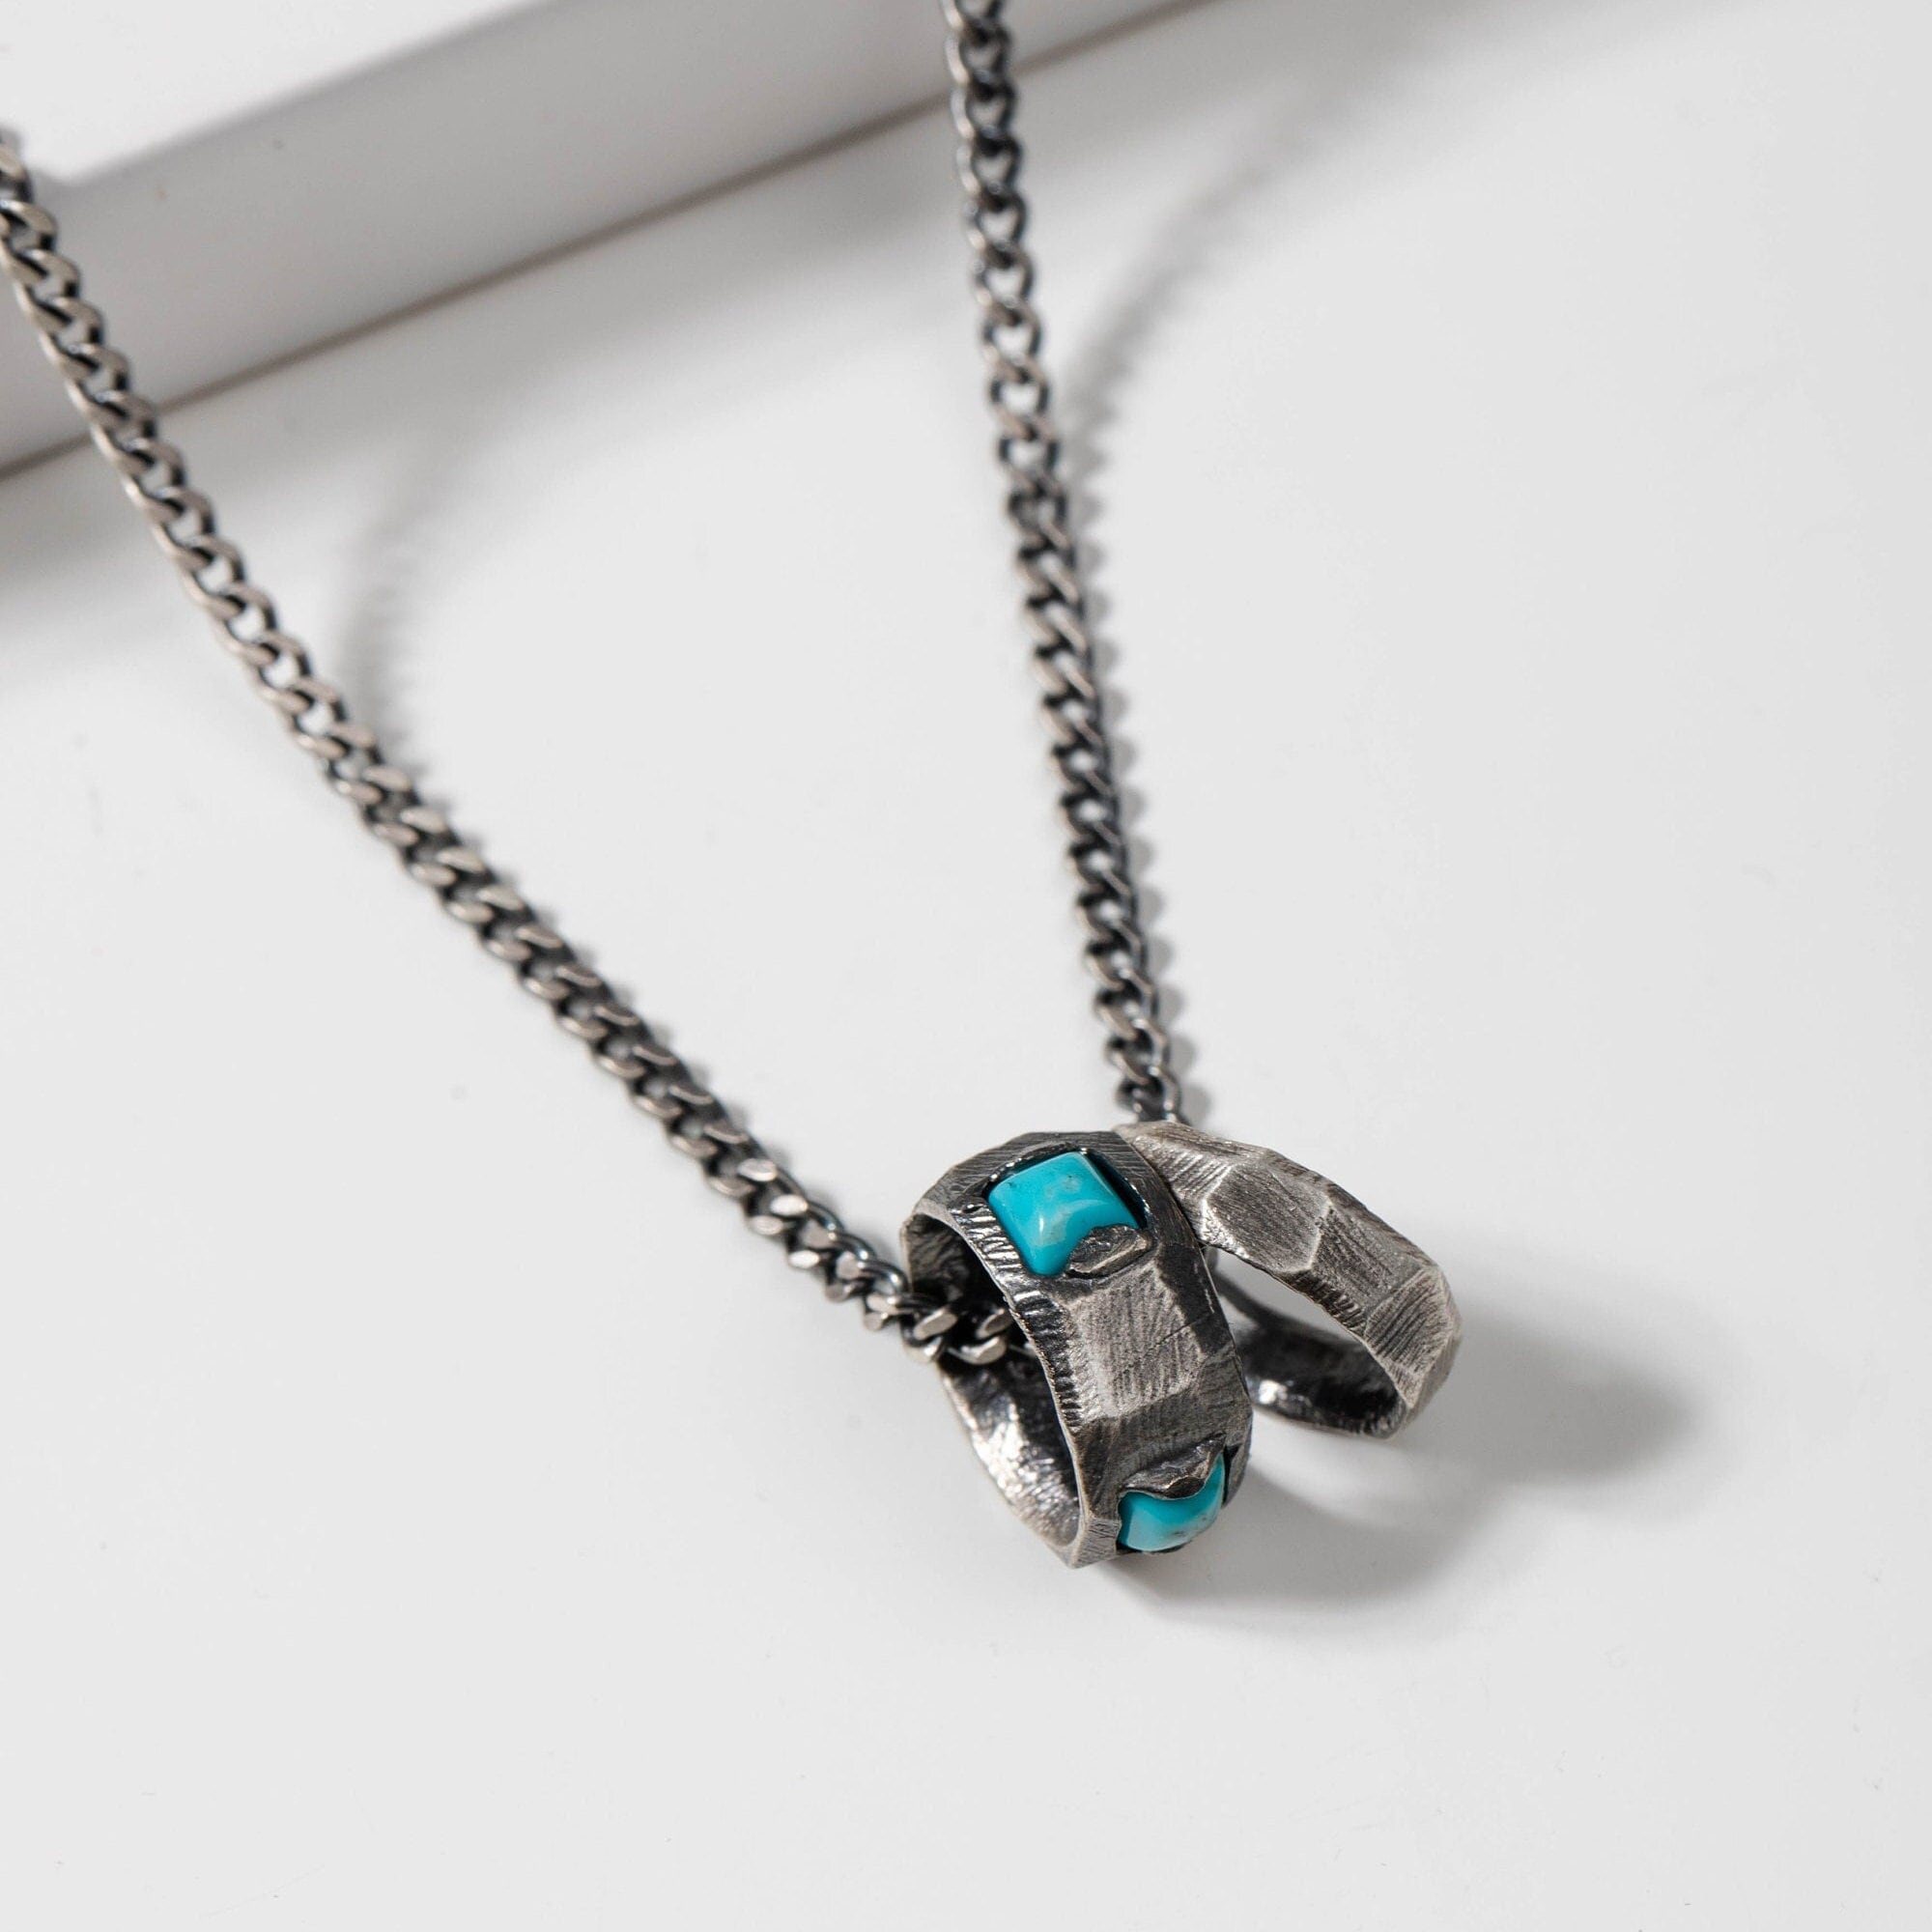 Buy Turquoise Necklace Men Online In India - Etsy India